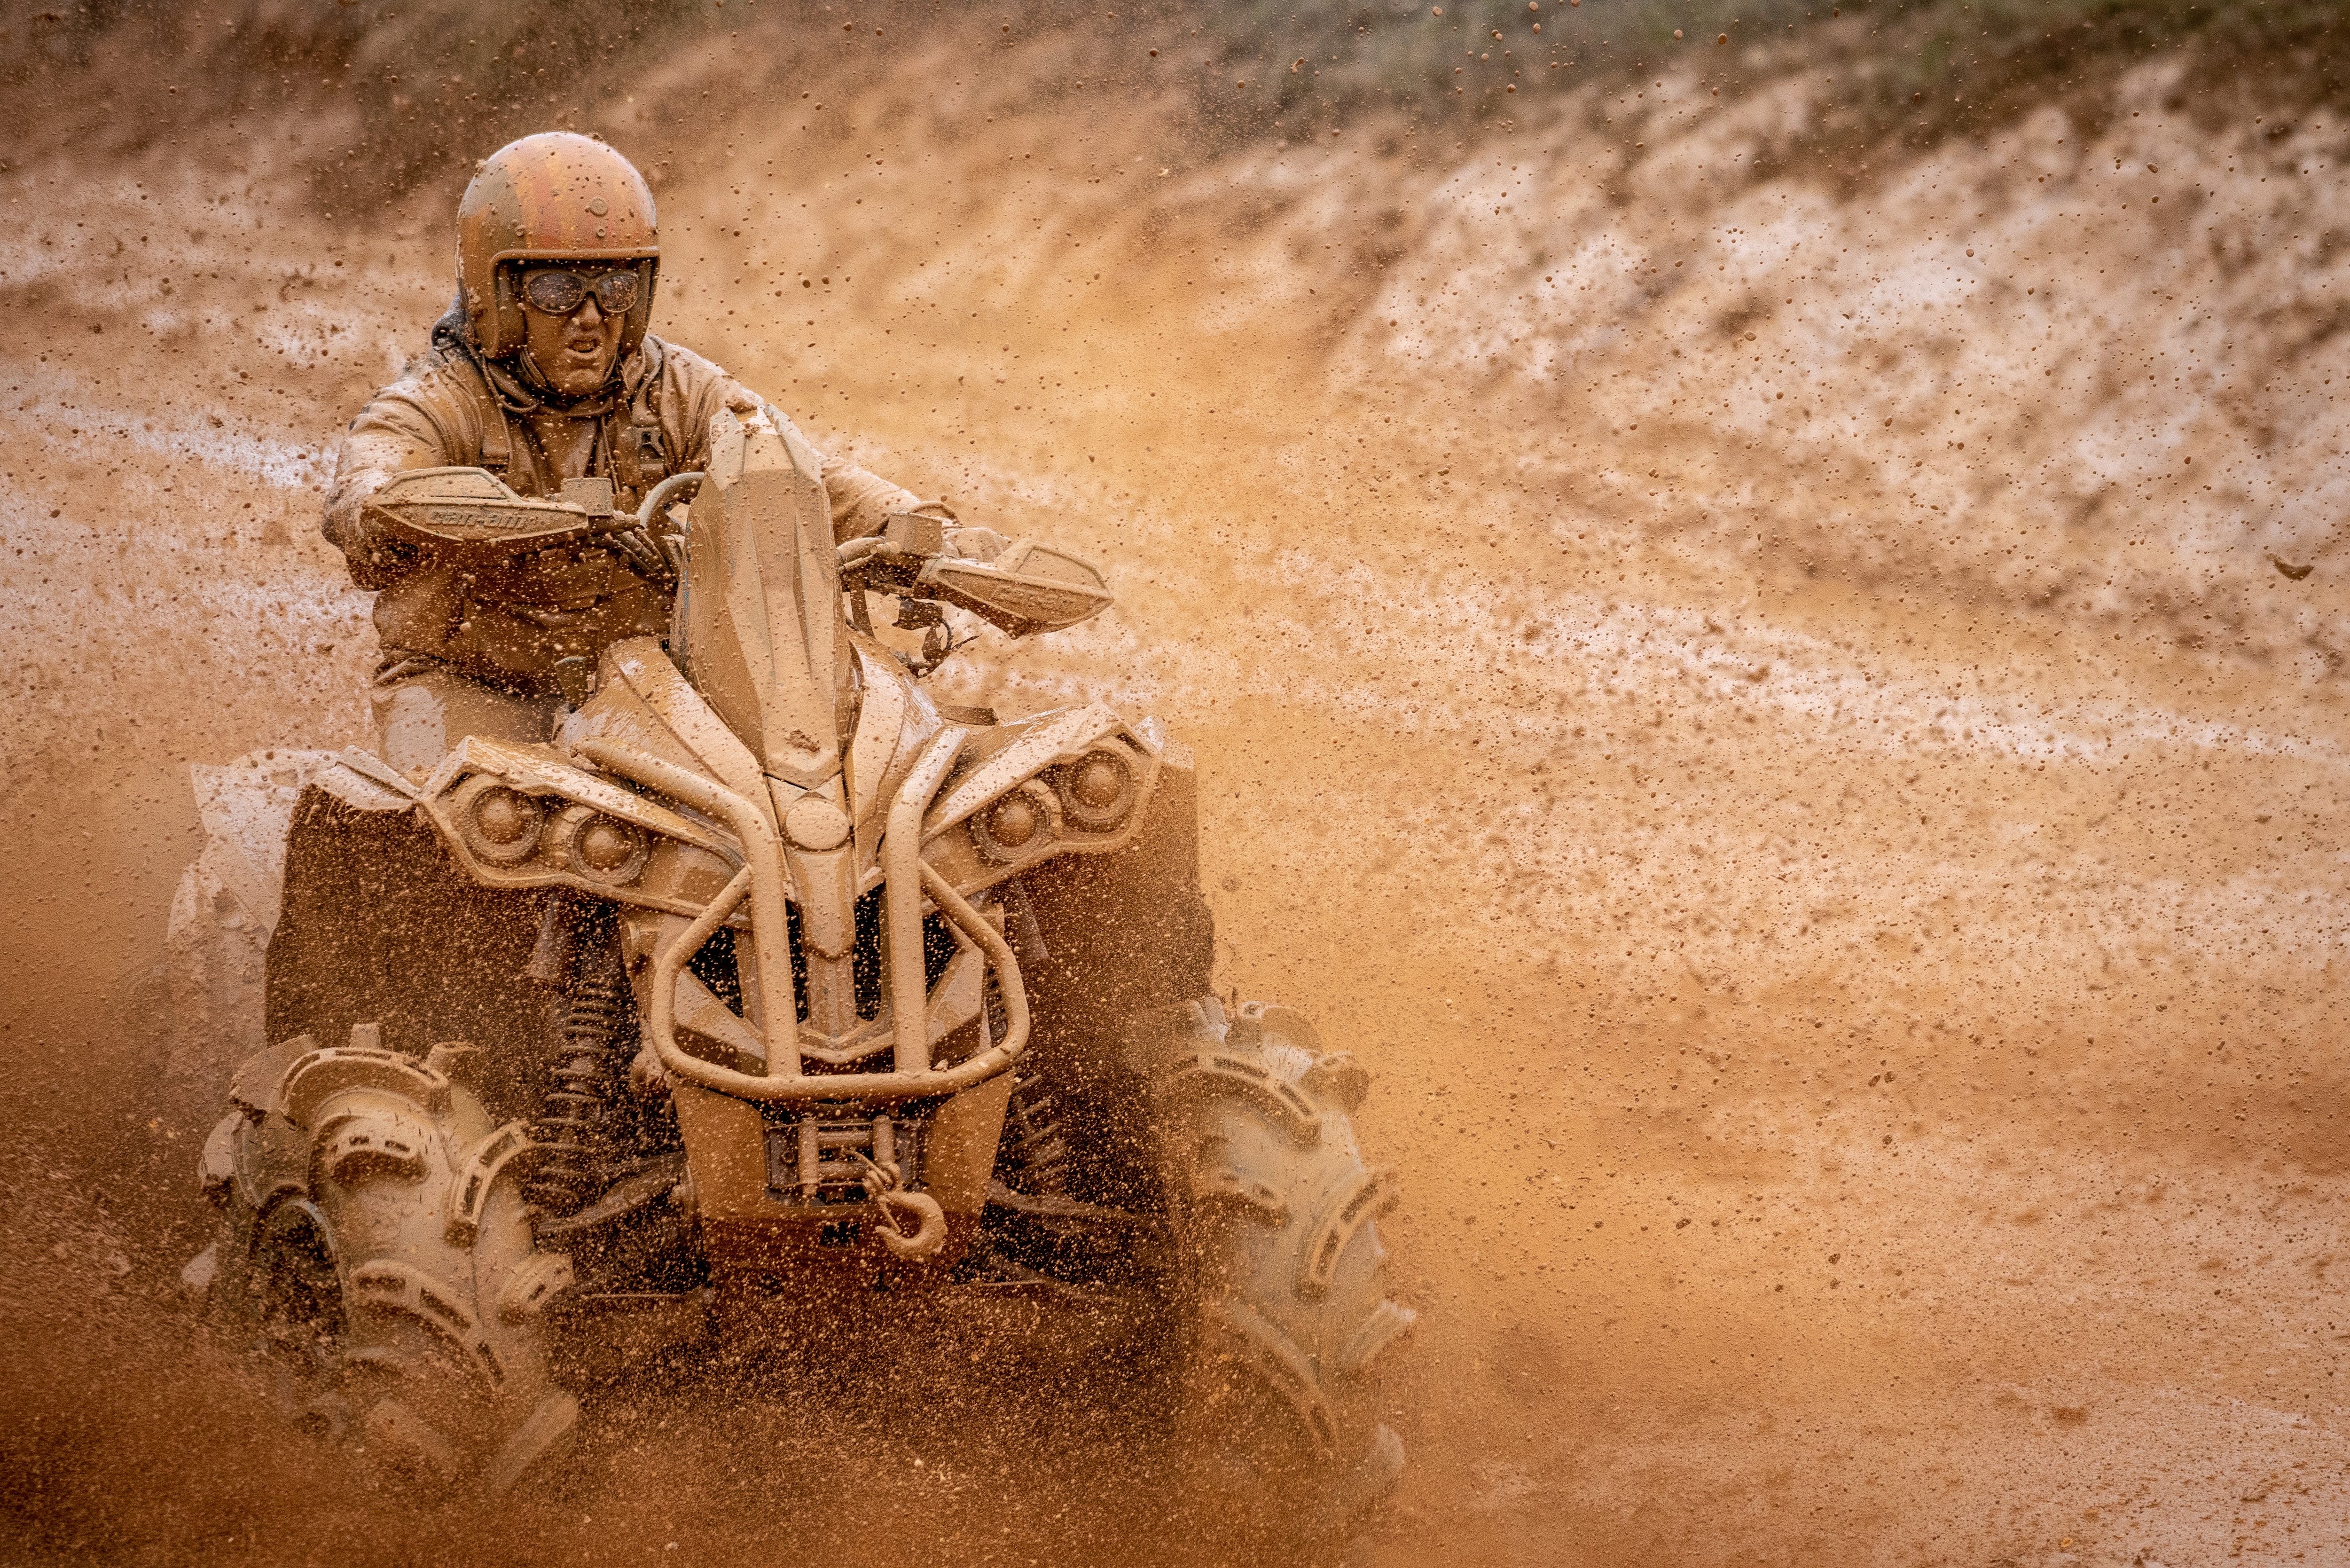 Man covered in mud is driving his Renegade ATV on a muddy trail